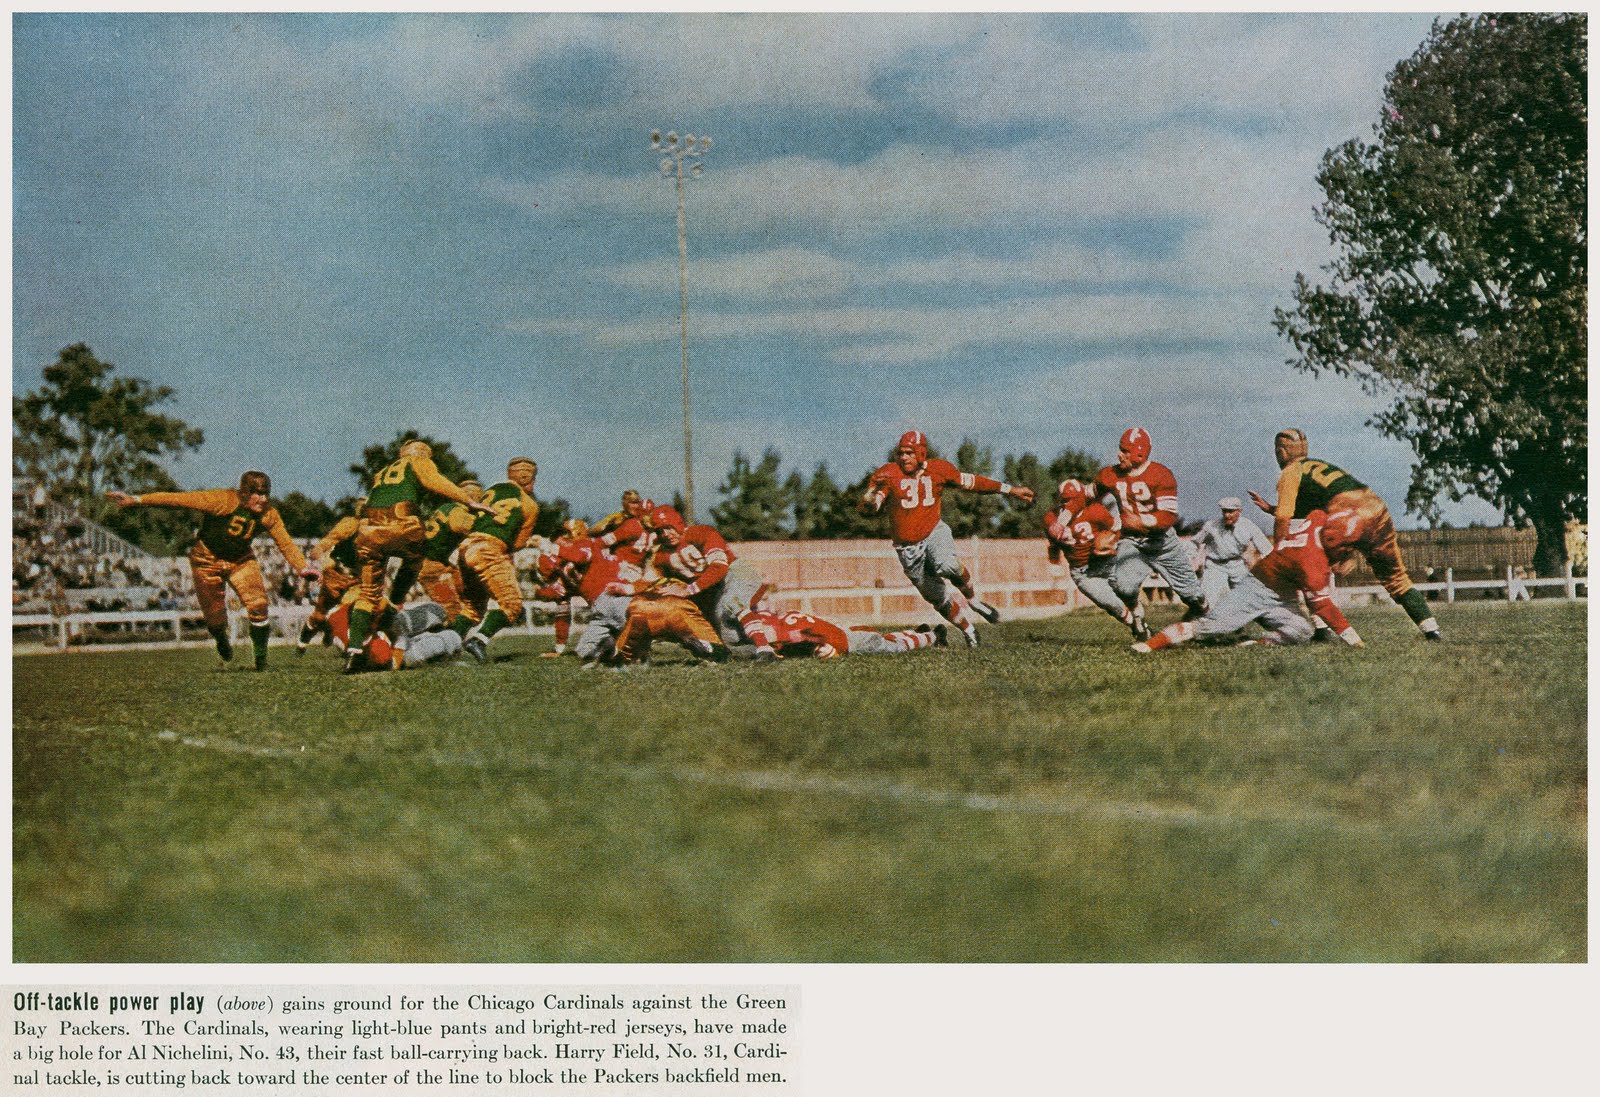 Packers-Cardinals_colorphoto_13sept1936.